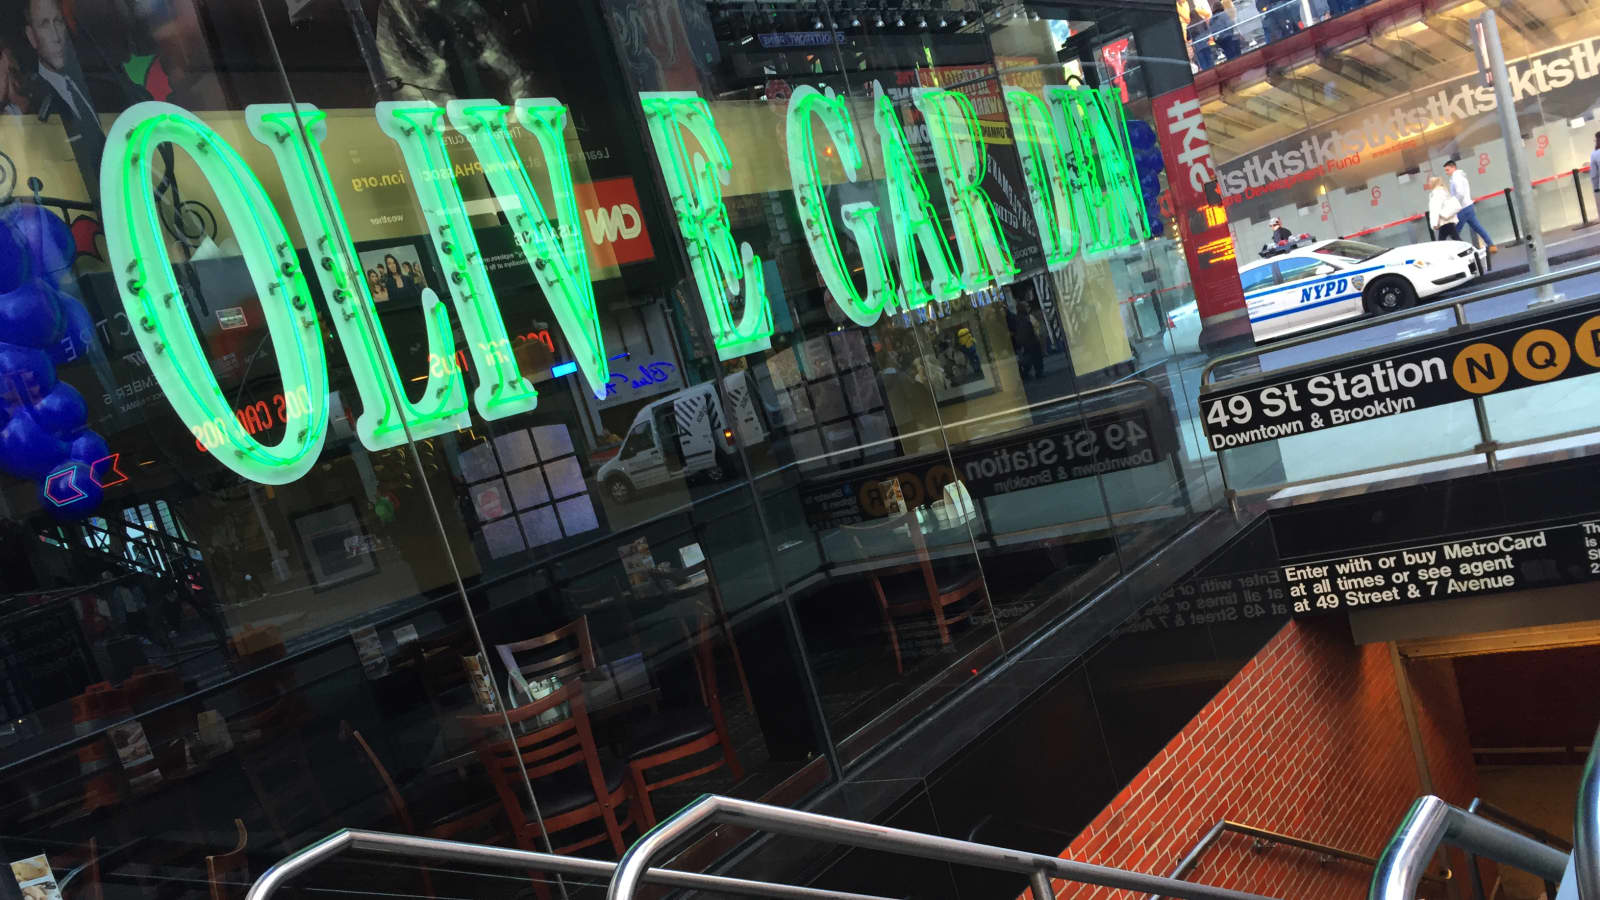 Manager Reveals What It S Like To Run Times Square Olive Garden